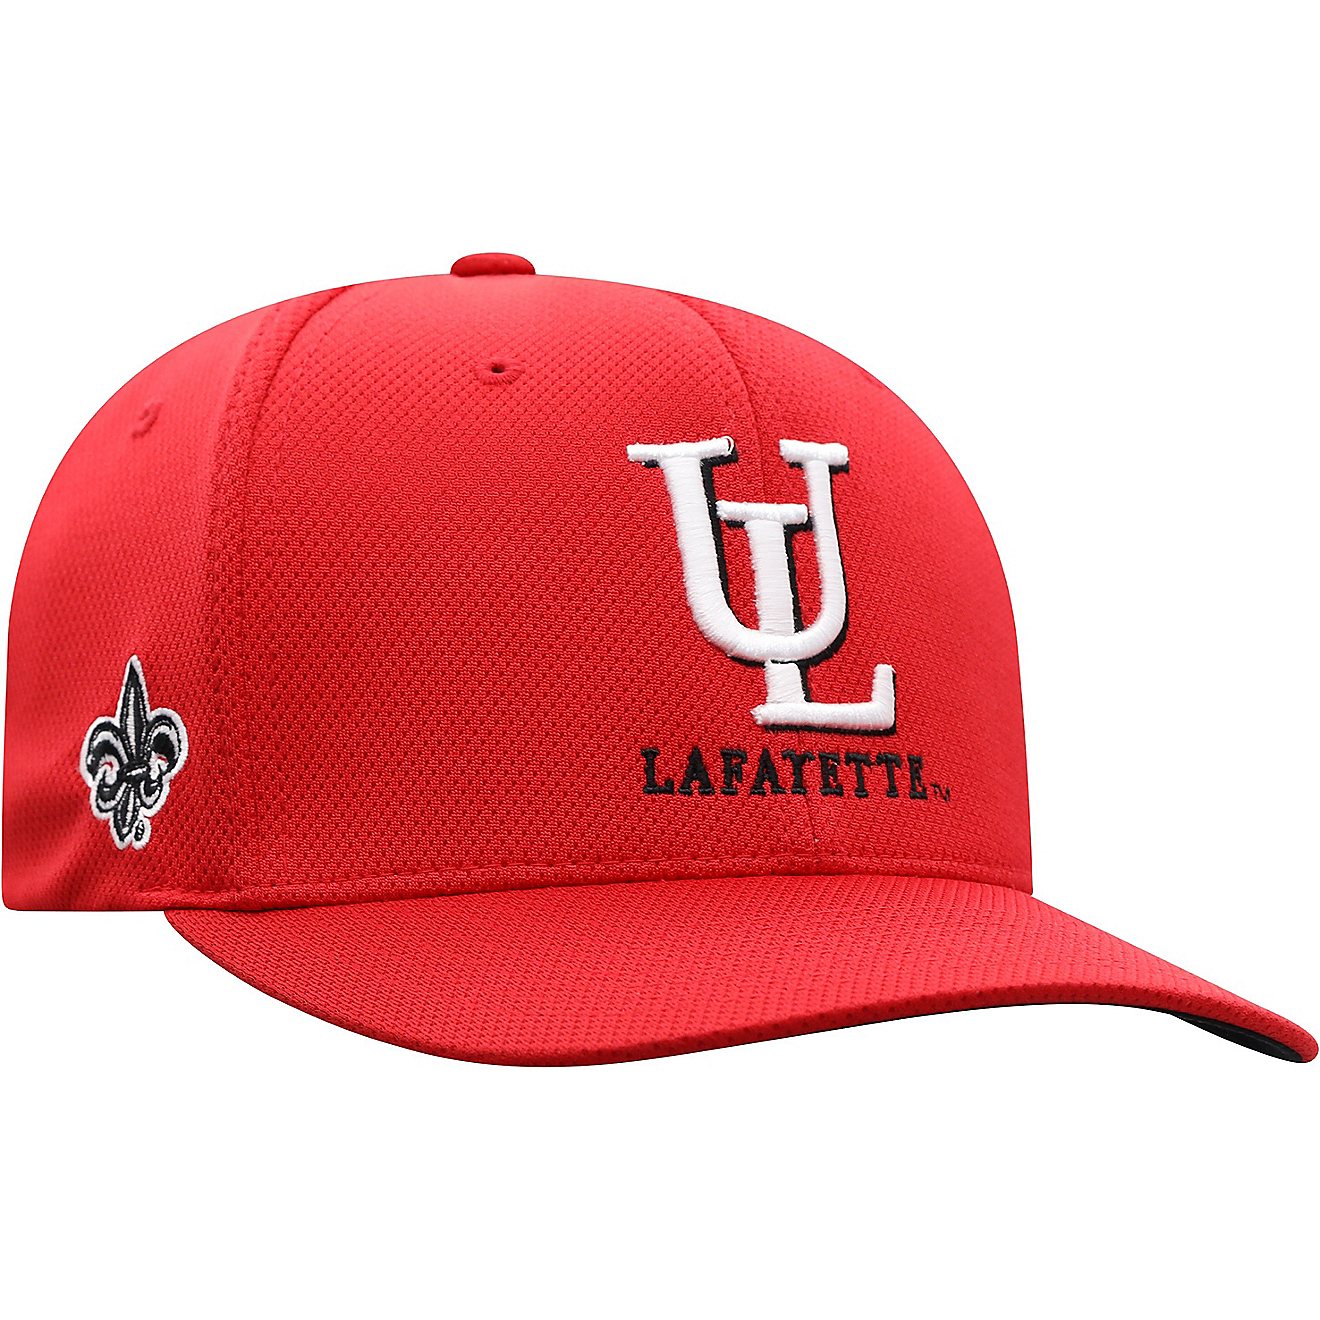 Top of the World Men’s University of Louisiana at Lafayette Reflex Cap                                                         - view number 3